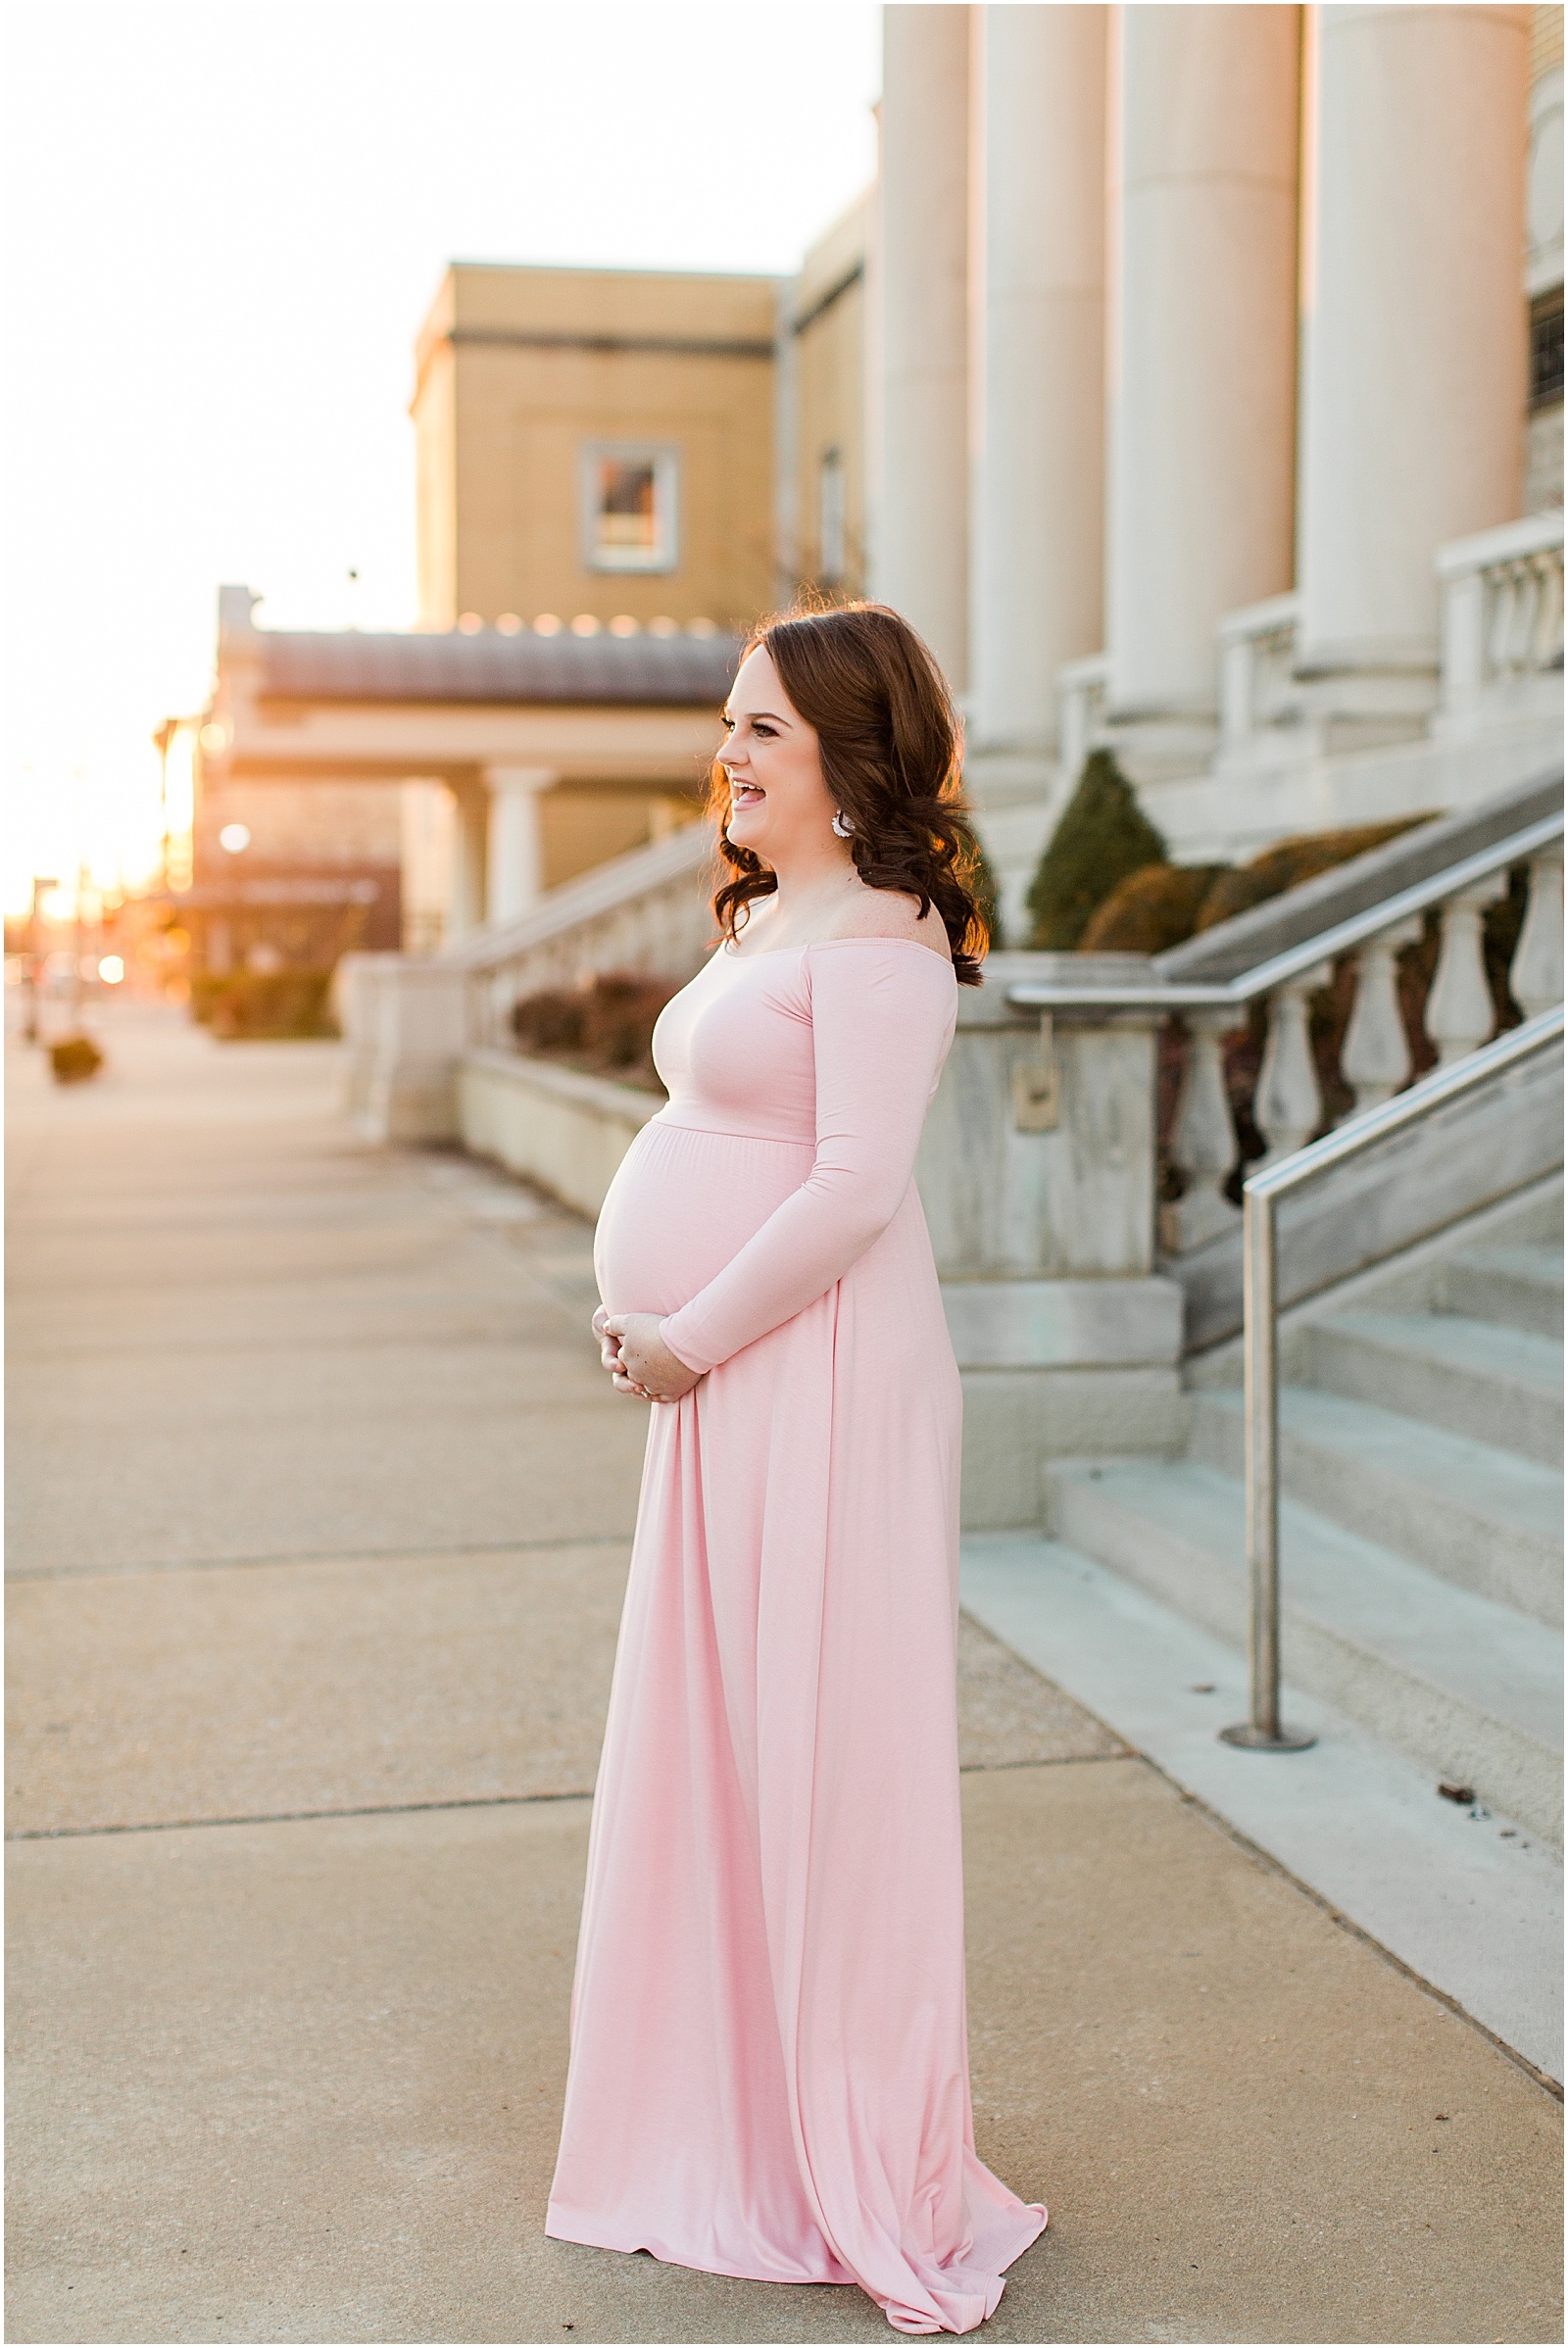 A Downtown Owensboro Maternity Session | Kayla and Grant Evansville Indiana Wedding Photographers-0010.jpg